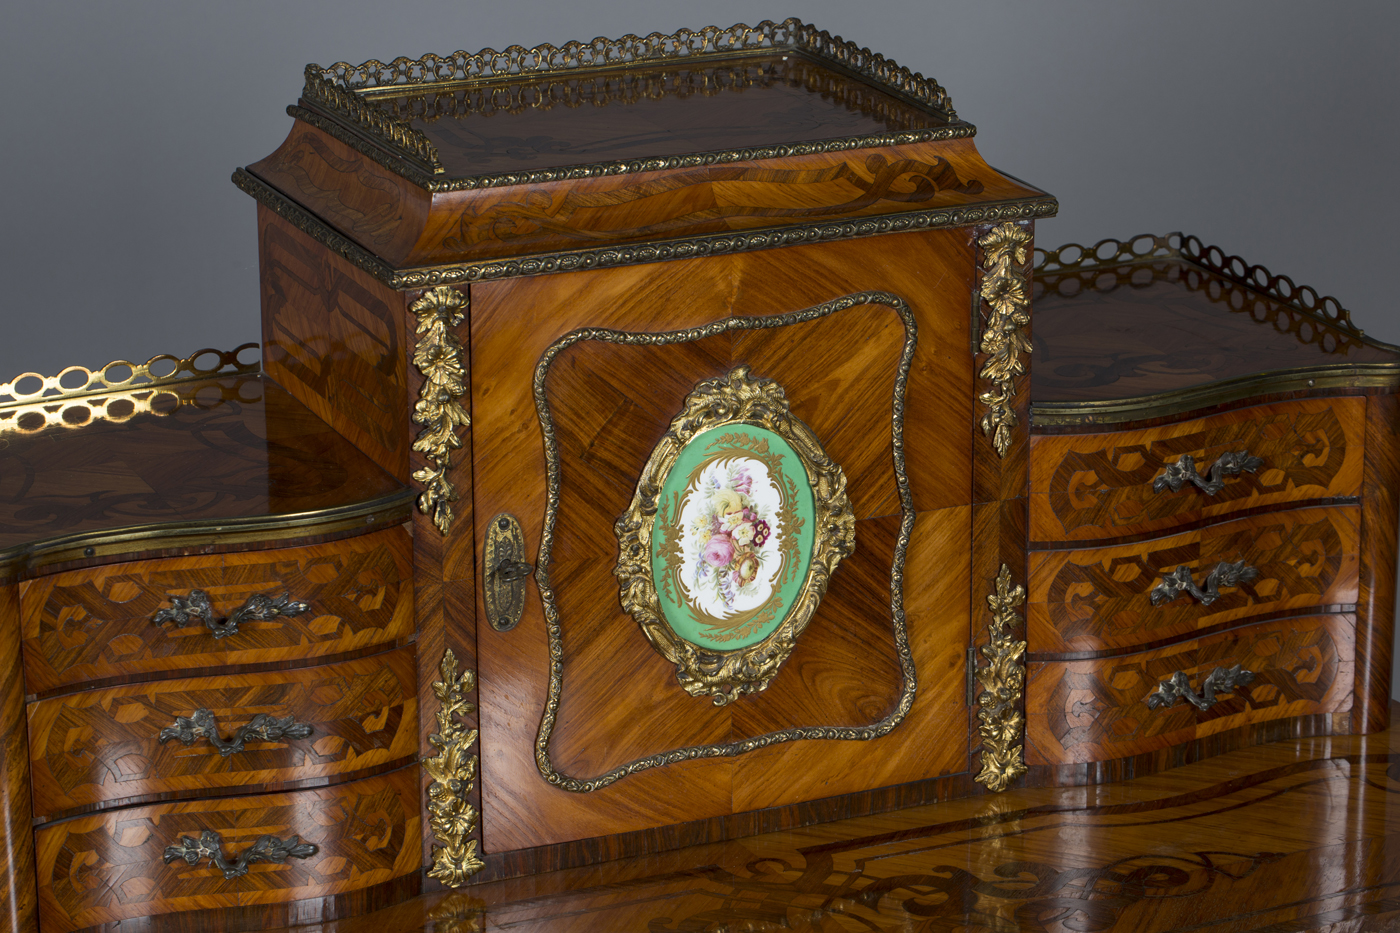 A mid-19th century Louis XV style kingwood bonheur-du-jour with rosewood banding of interwoven - Image 3 of 3